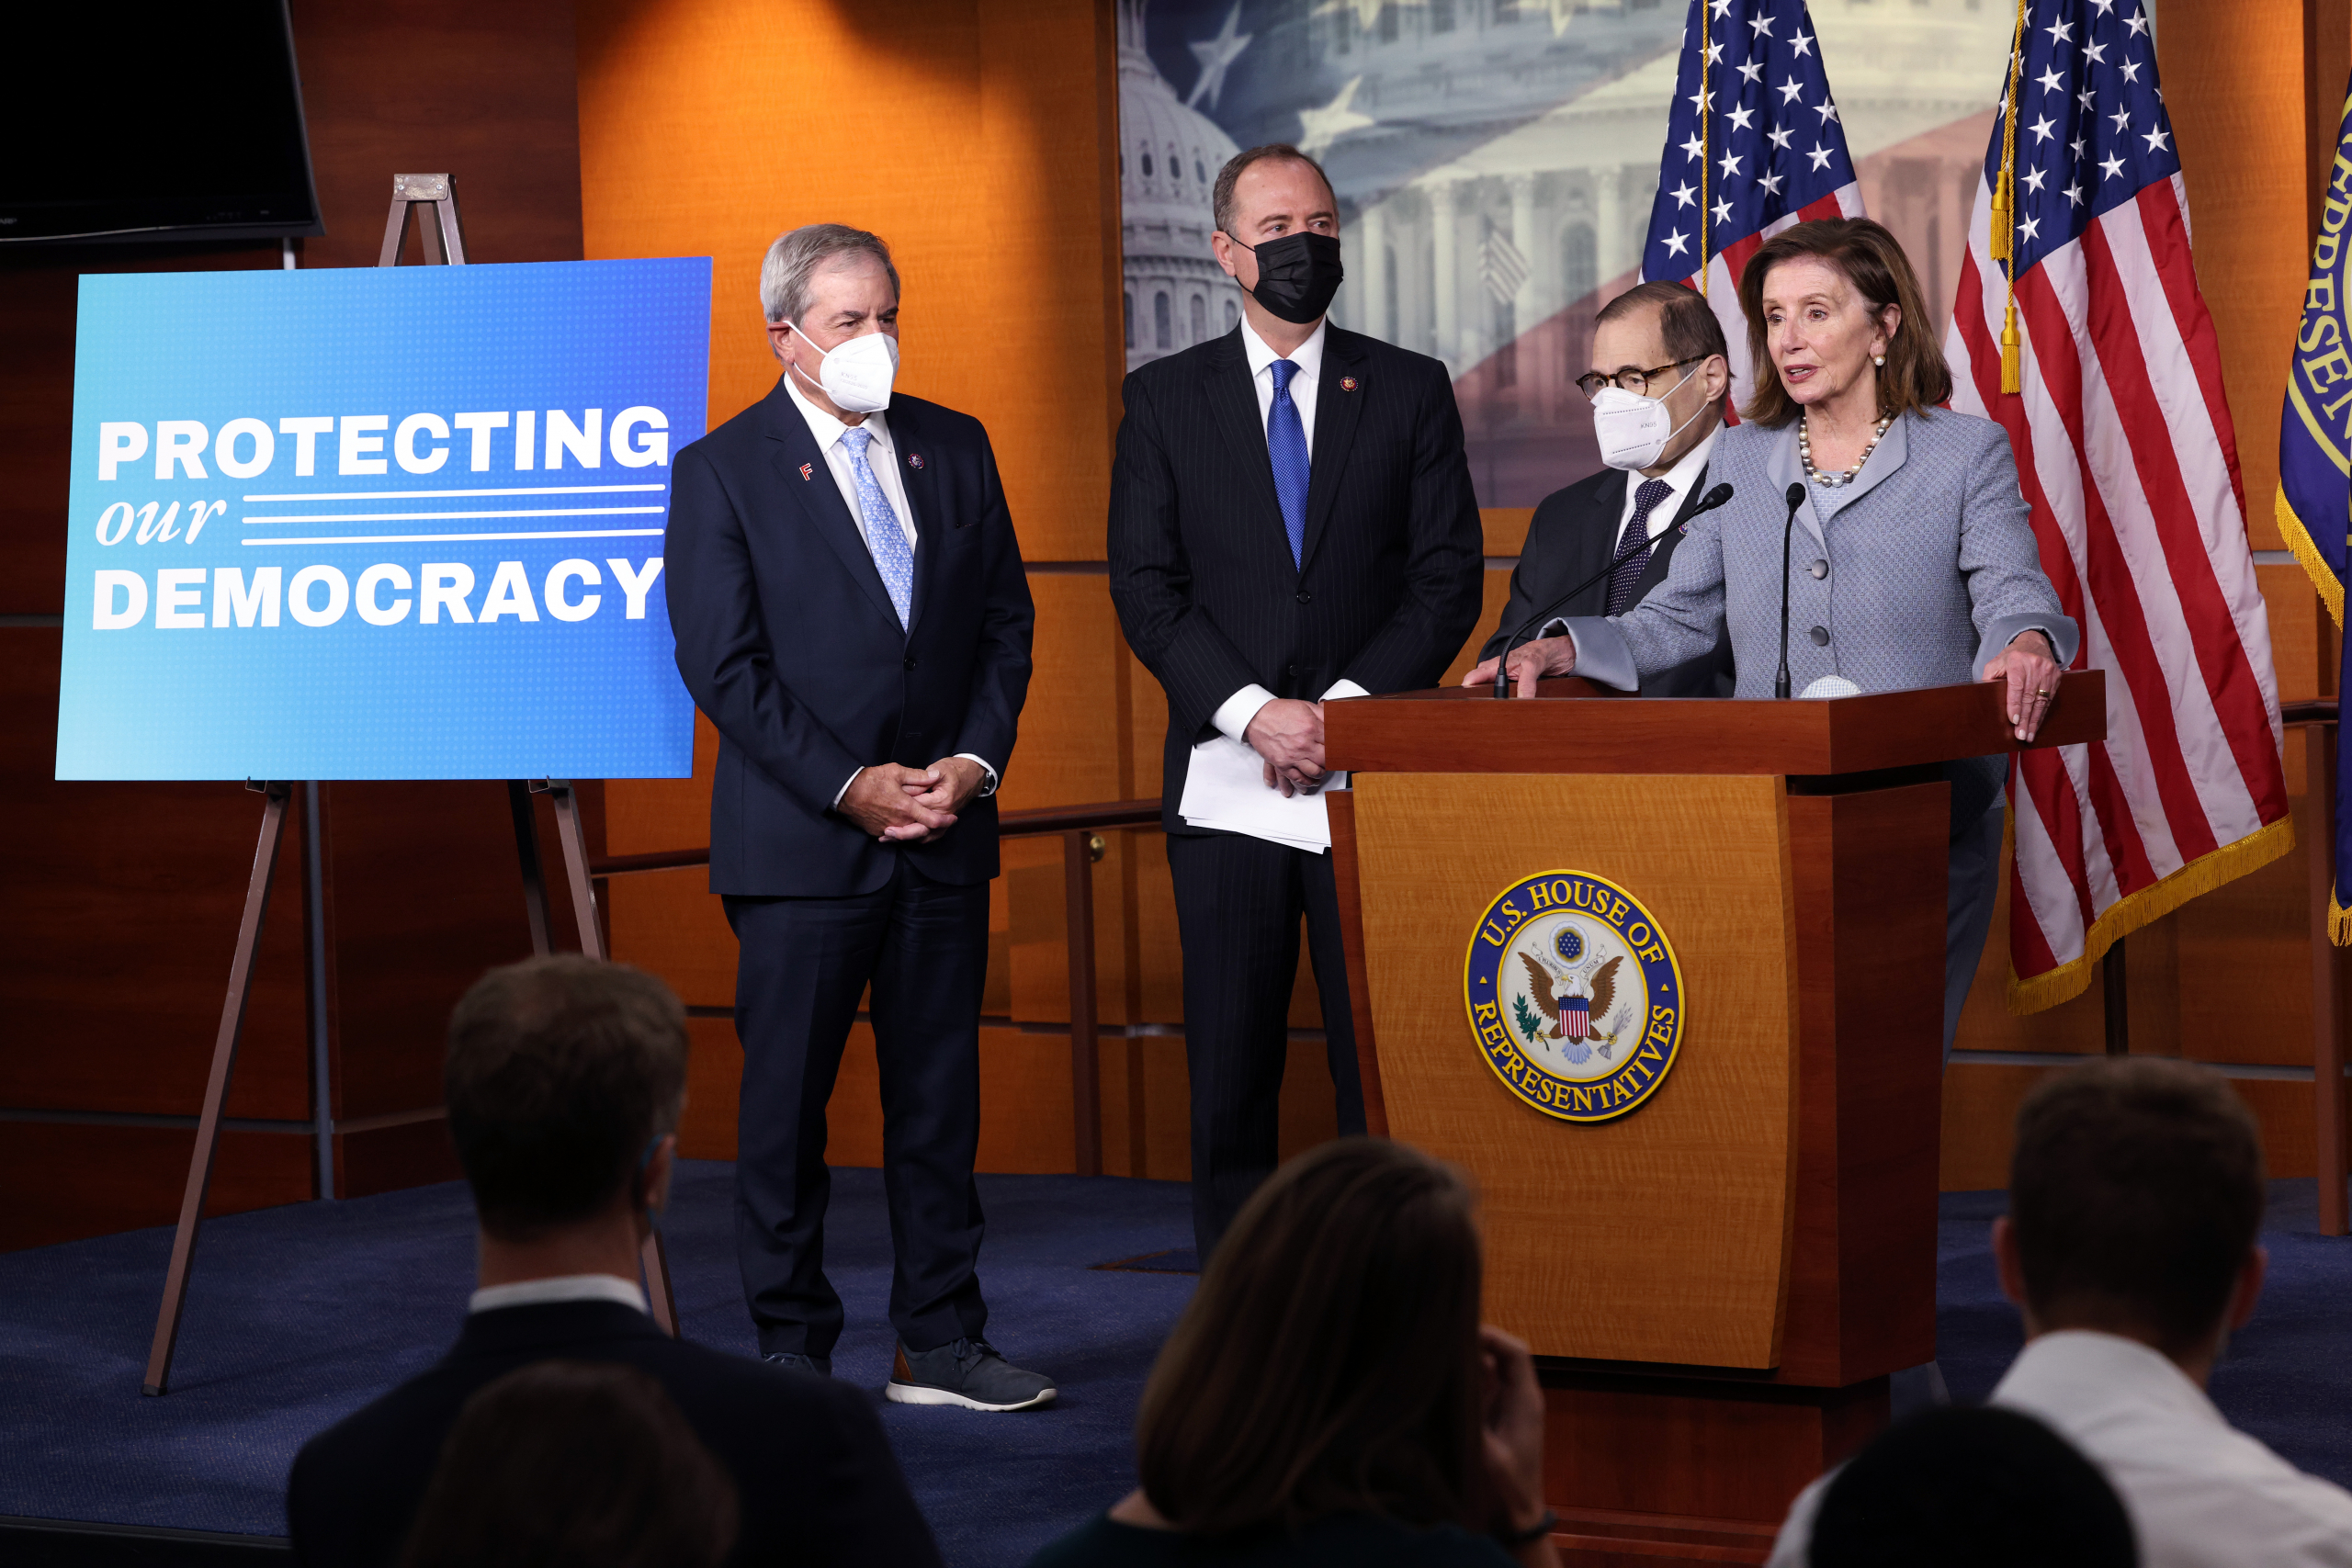 Speaker Pelosi Holds News Conference To Discuss Protecting Our Democracy Act